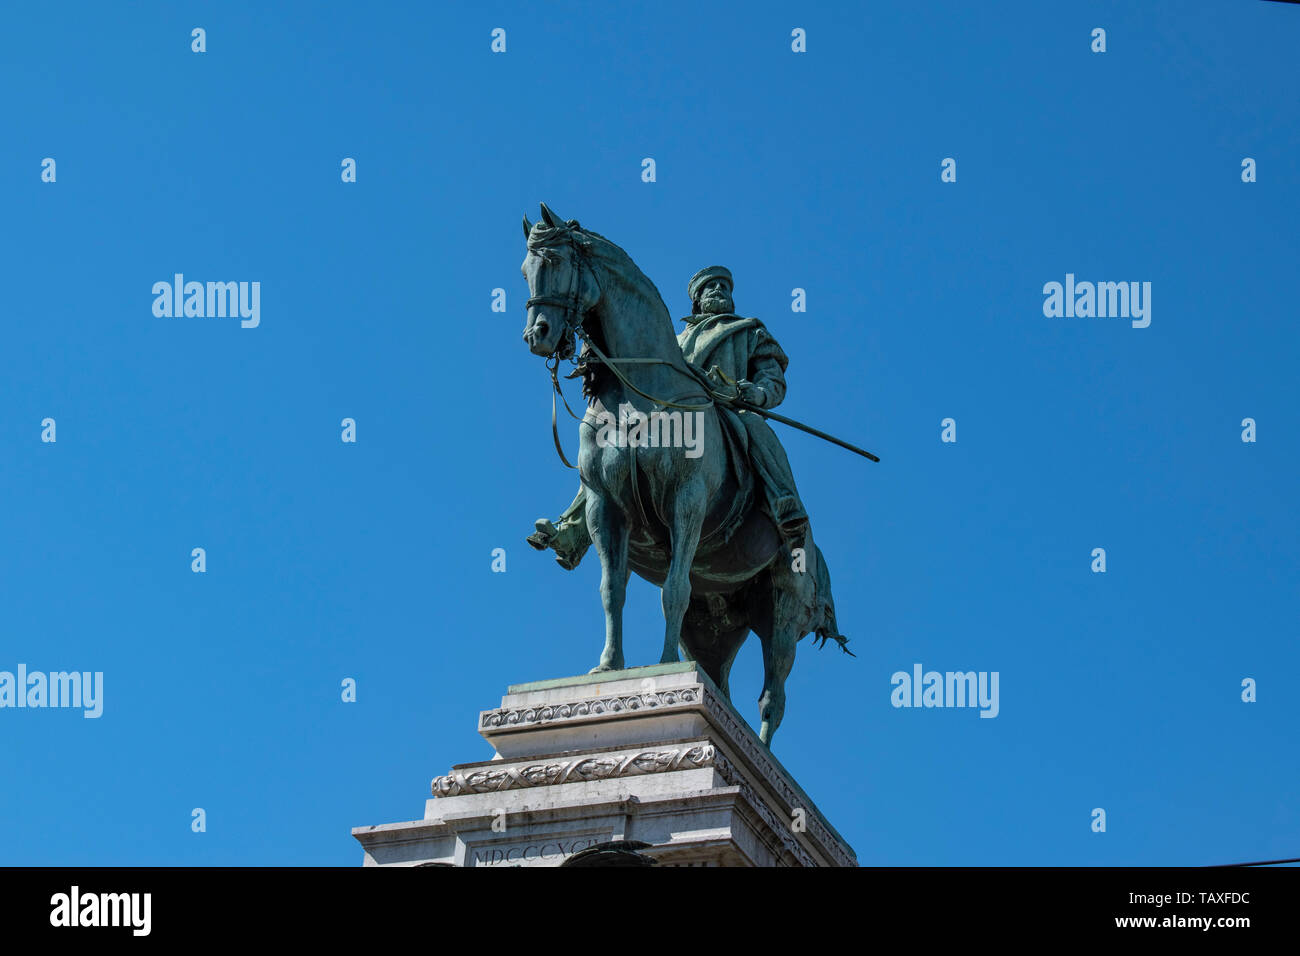 Milan: the monument to Giuseppe Garibaldi, Italian general and nationalist who contributed to the Italian unification and the creation of the Kingdom Stock Photo